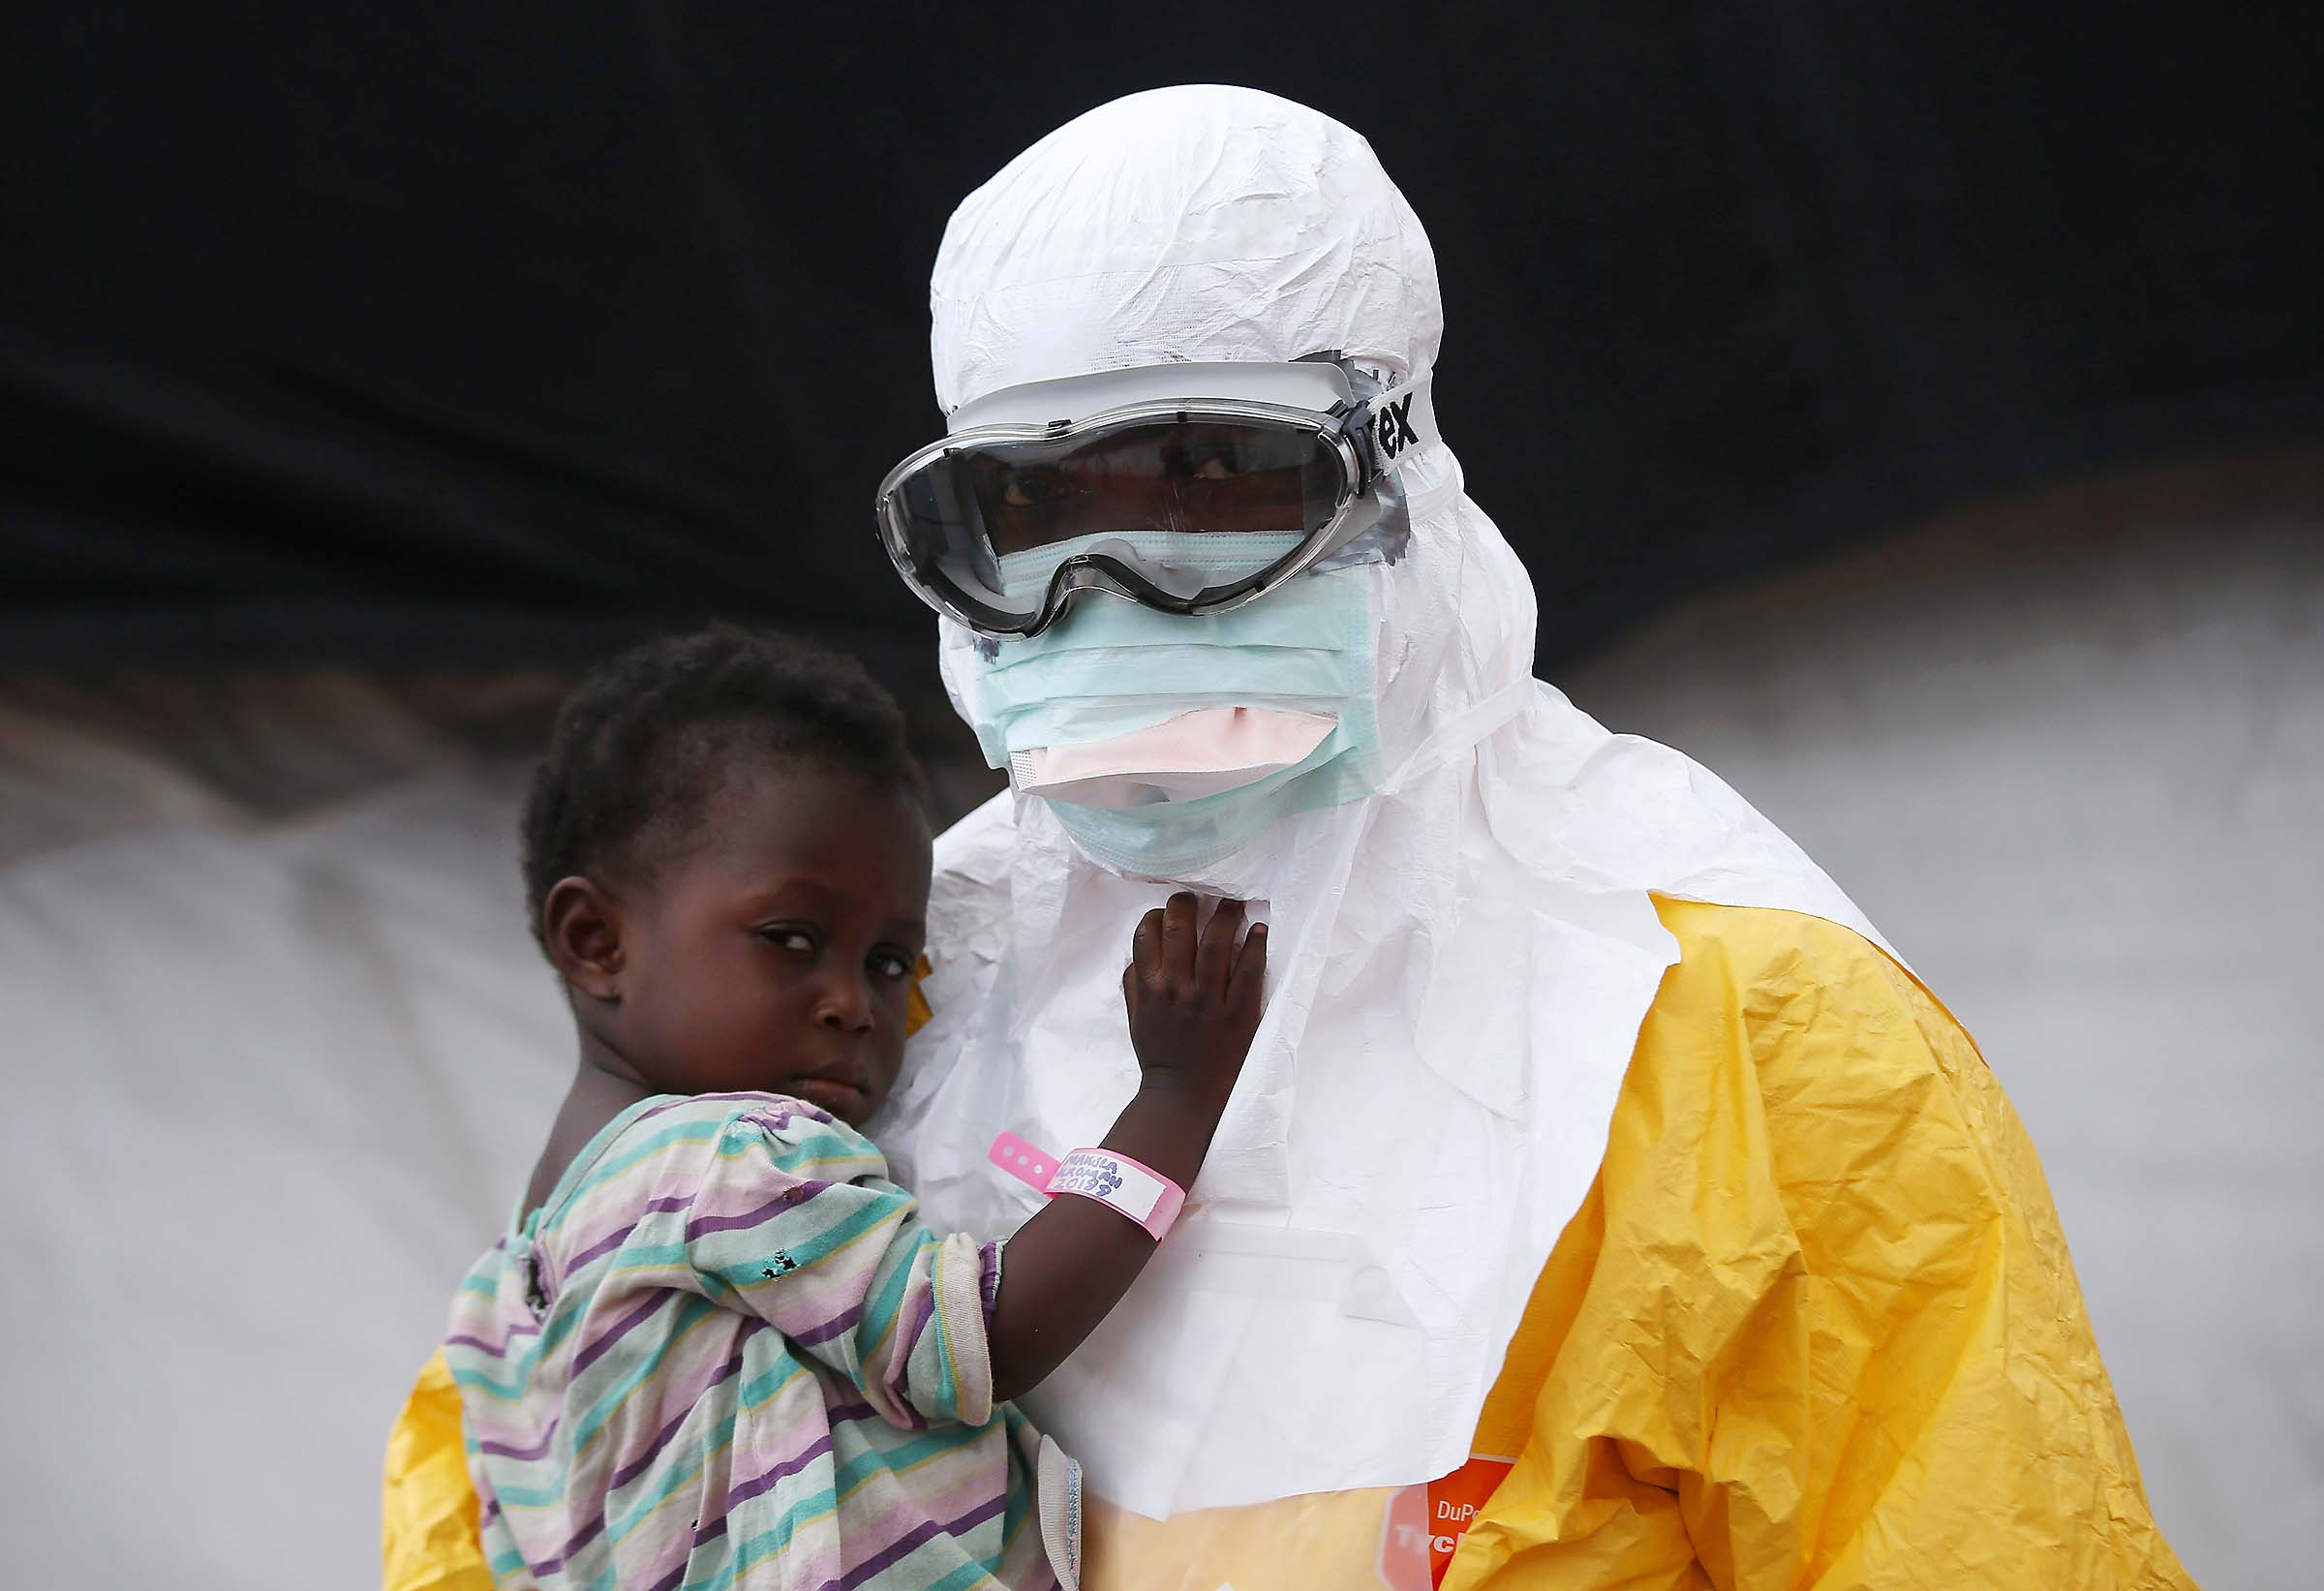 A Doctors Without Borders health worker holds a child suspected of having Ebola in the MSF treatment center in Paynesville, Liberia. Photo by John Moore